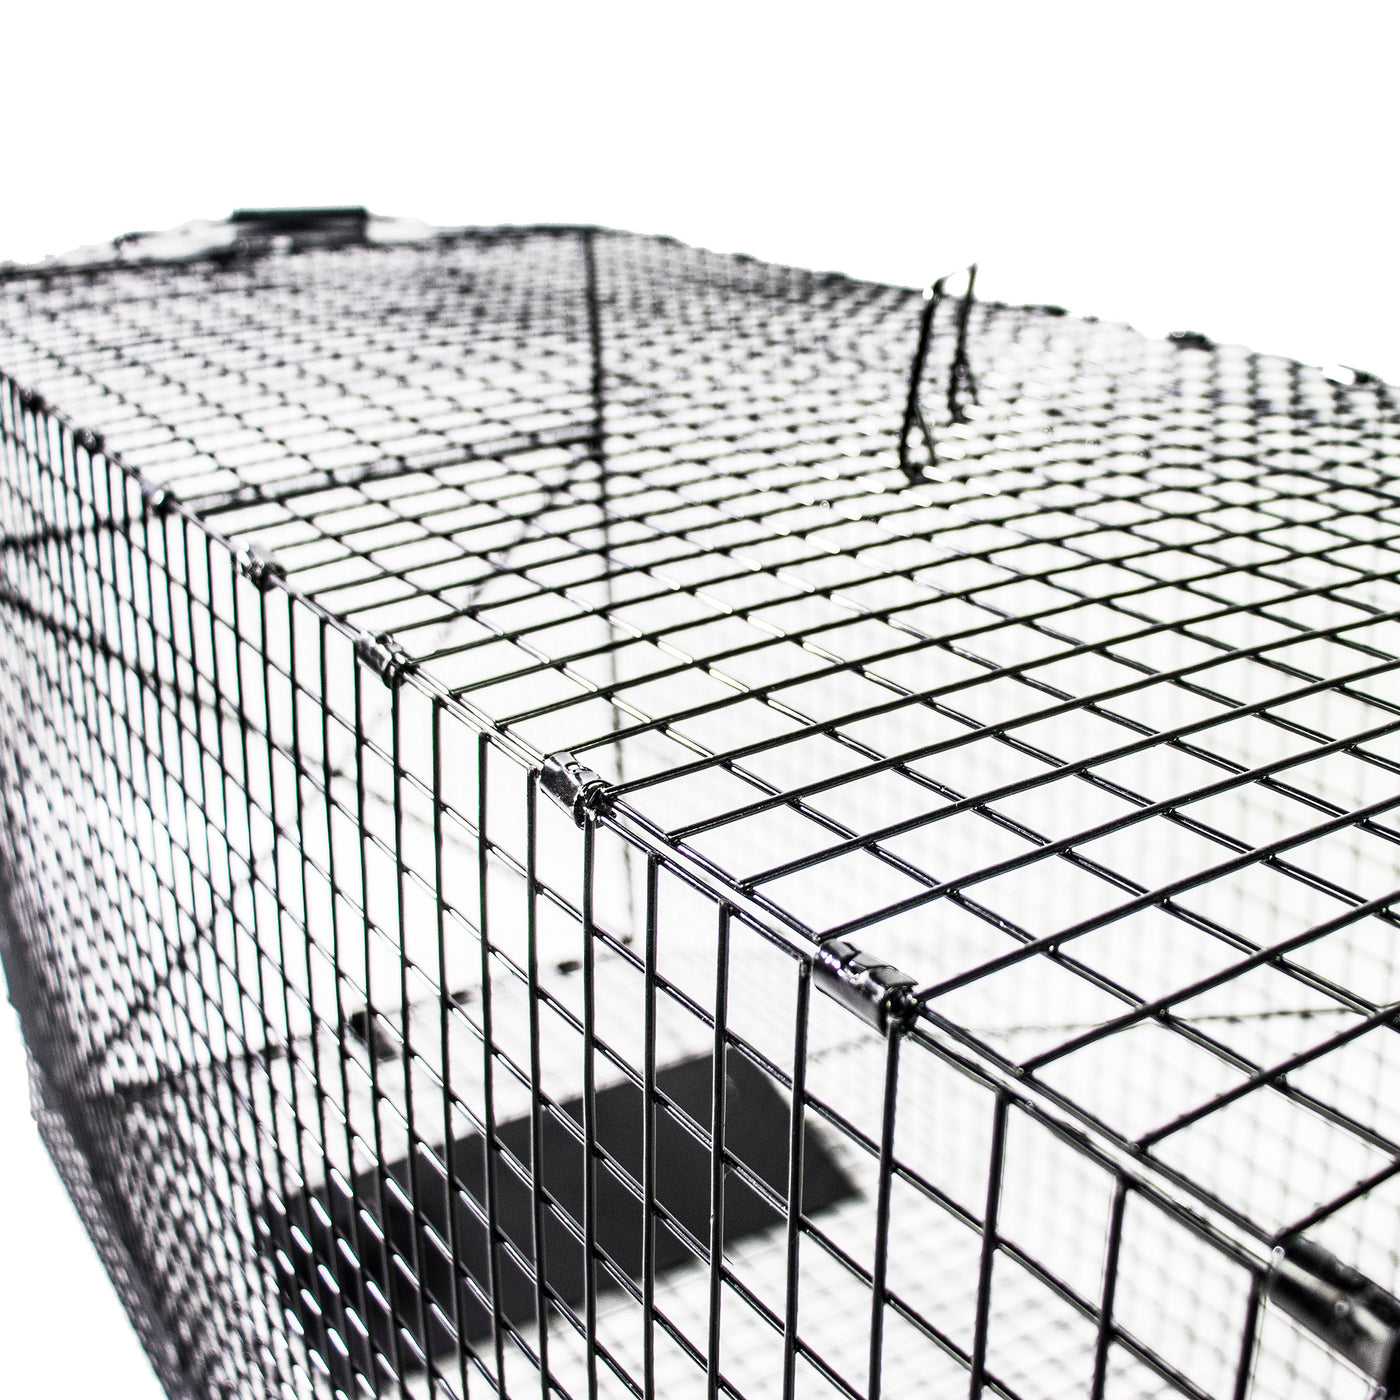 Humane Way Folding 50 Inch Live Humane Animal Trap - Safe Traps for All  Animals - Dogs, Raccoons, Cats, Groundhogs, Opossums, Coyote, Bobcat -  50x20x26 179.48 - Quarter Price